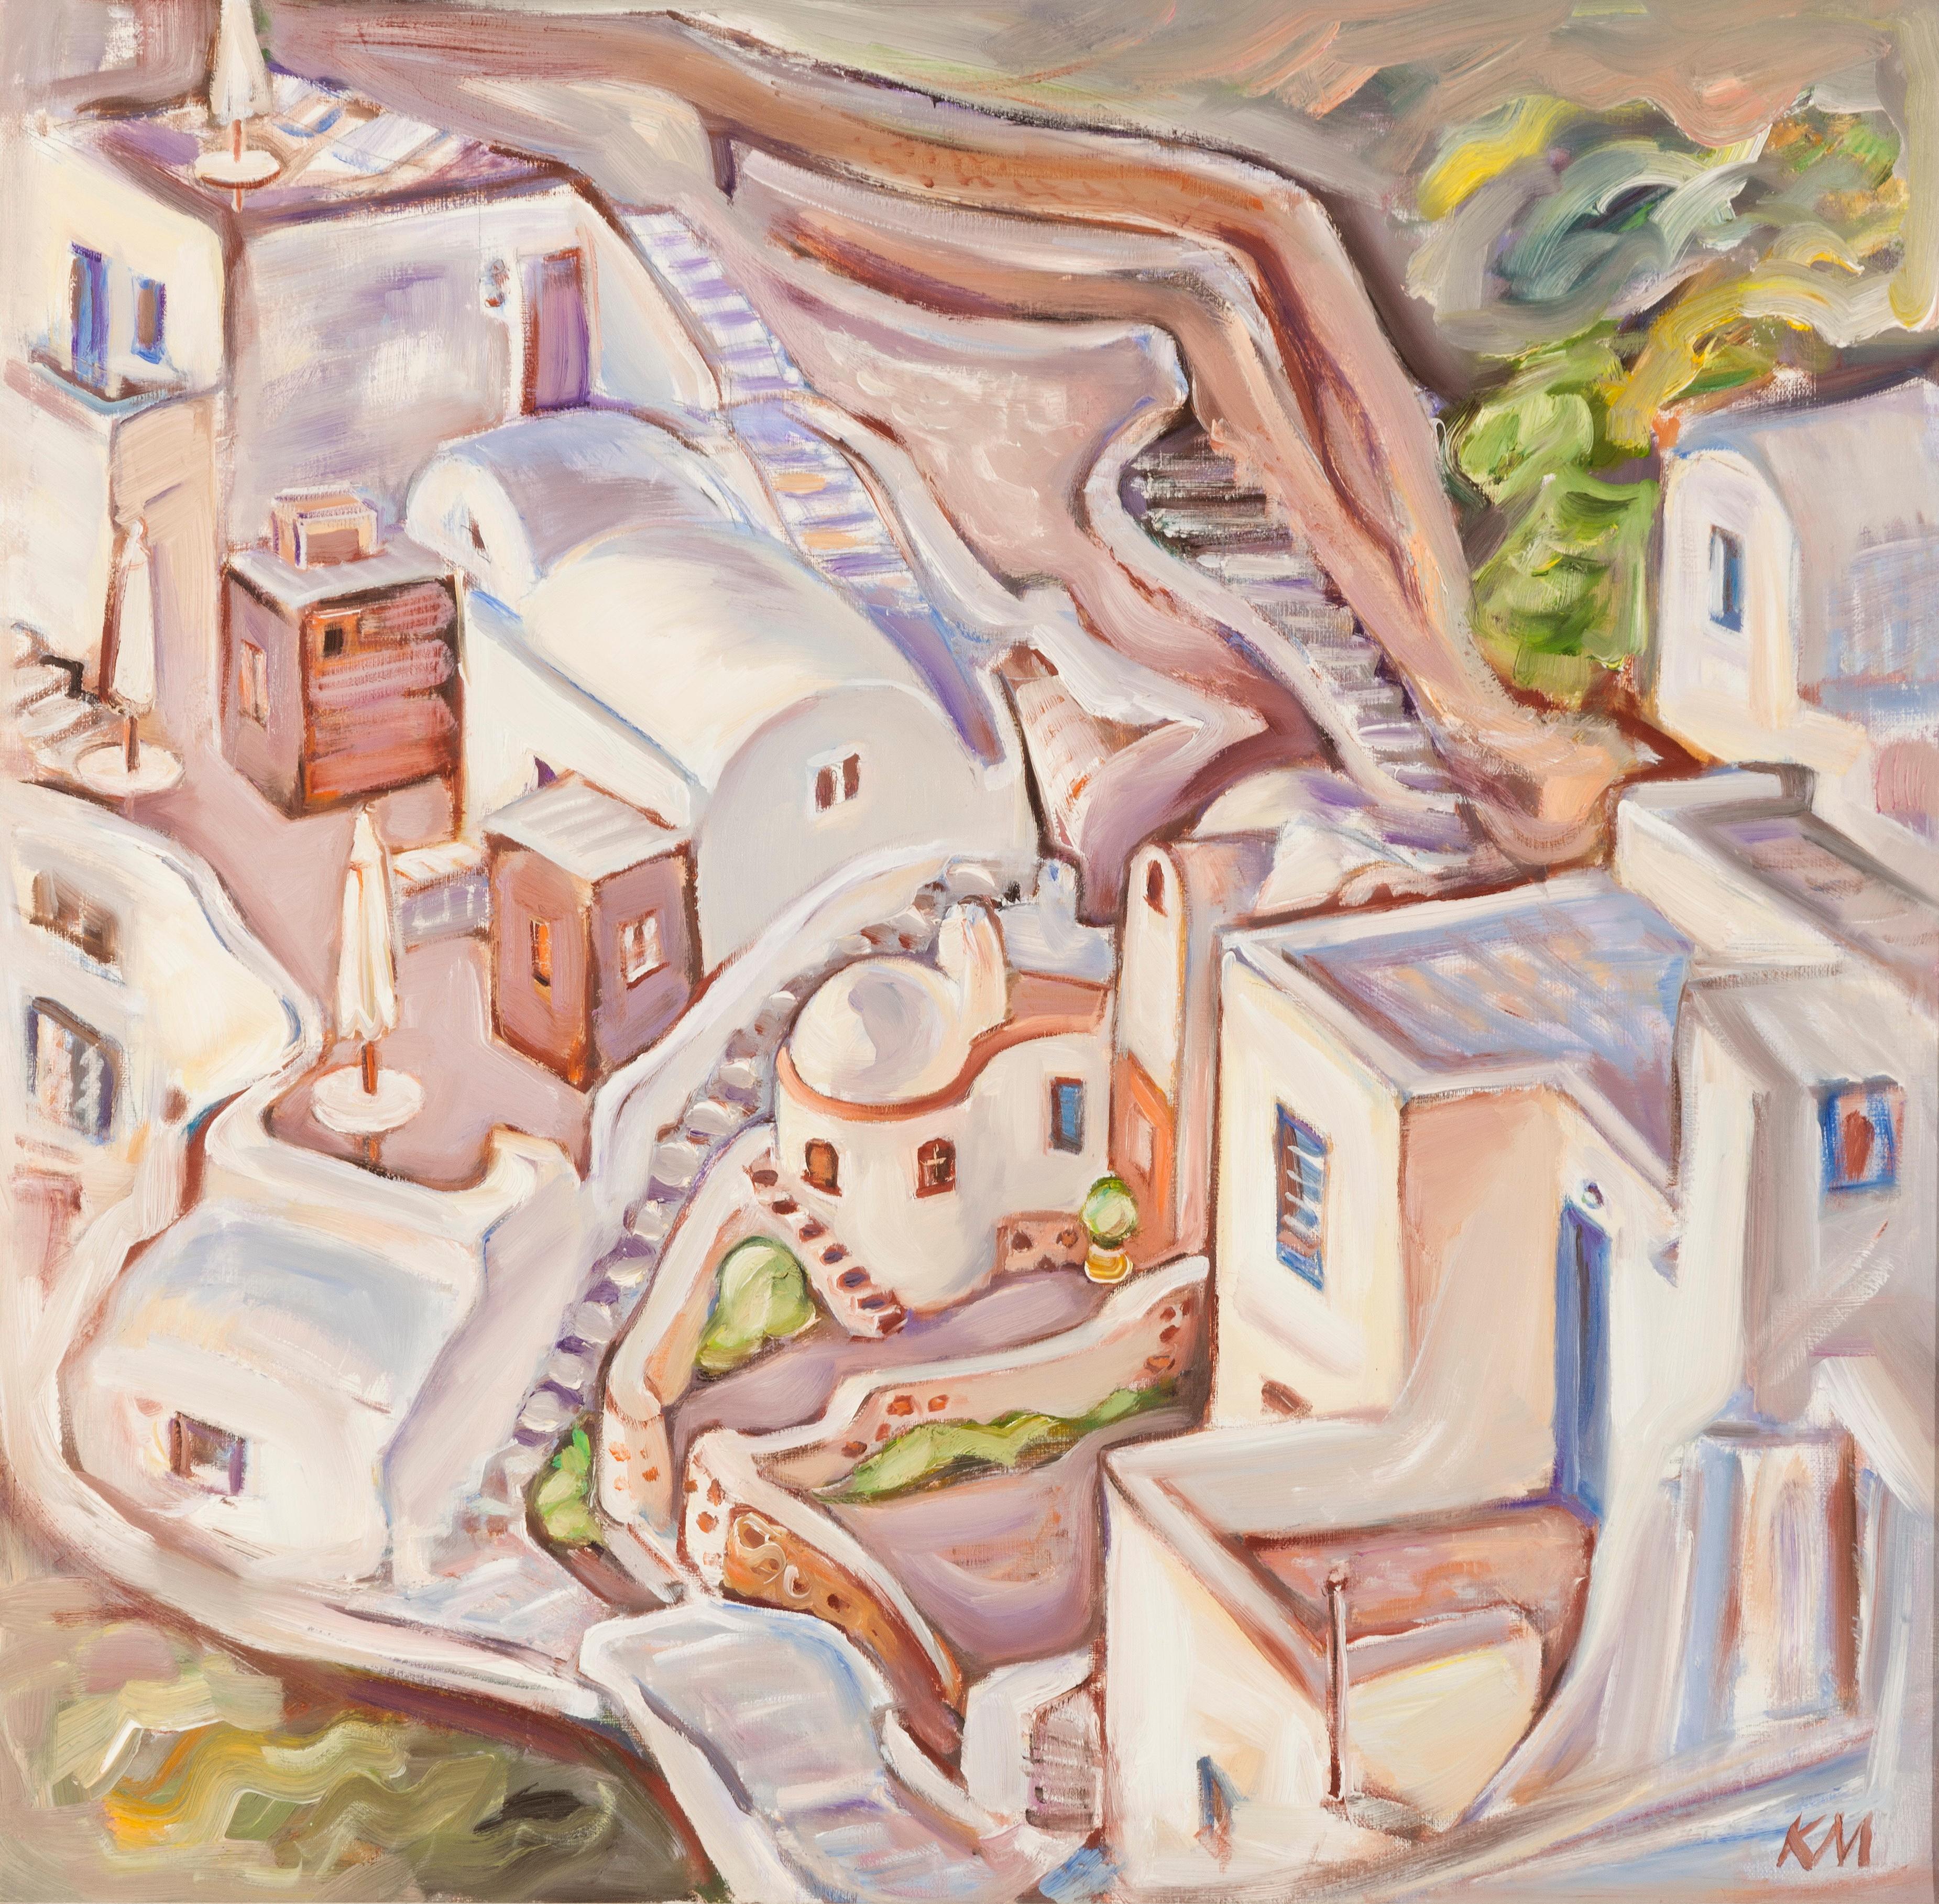 "Santorini, in the Fairy tale Ia" is an modernist painting by Maestro Krassimira Mihaylova.

About the artwork:

TECHNIQUE:  oil painting
STYLE: Impressionist, Contemporary
Edition : Unique, signed
Weight: Approximately 2 kg.

The painting is